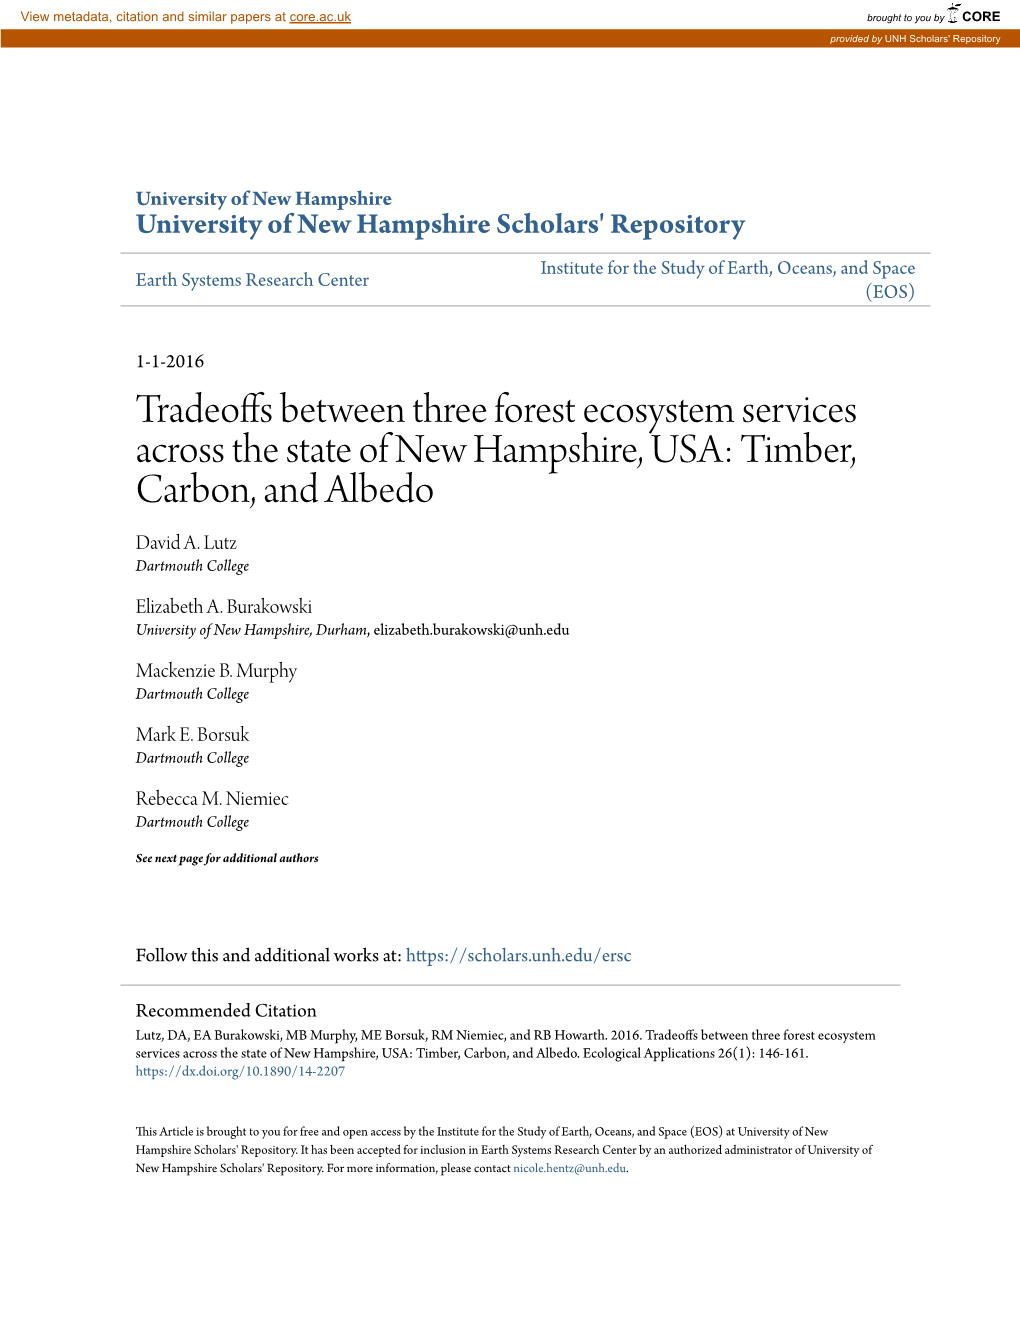 Tradeoffs Between Three Forest Ecosystem Services Across the State of New Hampshire, USA: Timber, Carbon, and Albedo David A